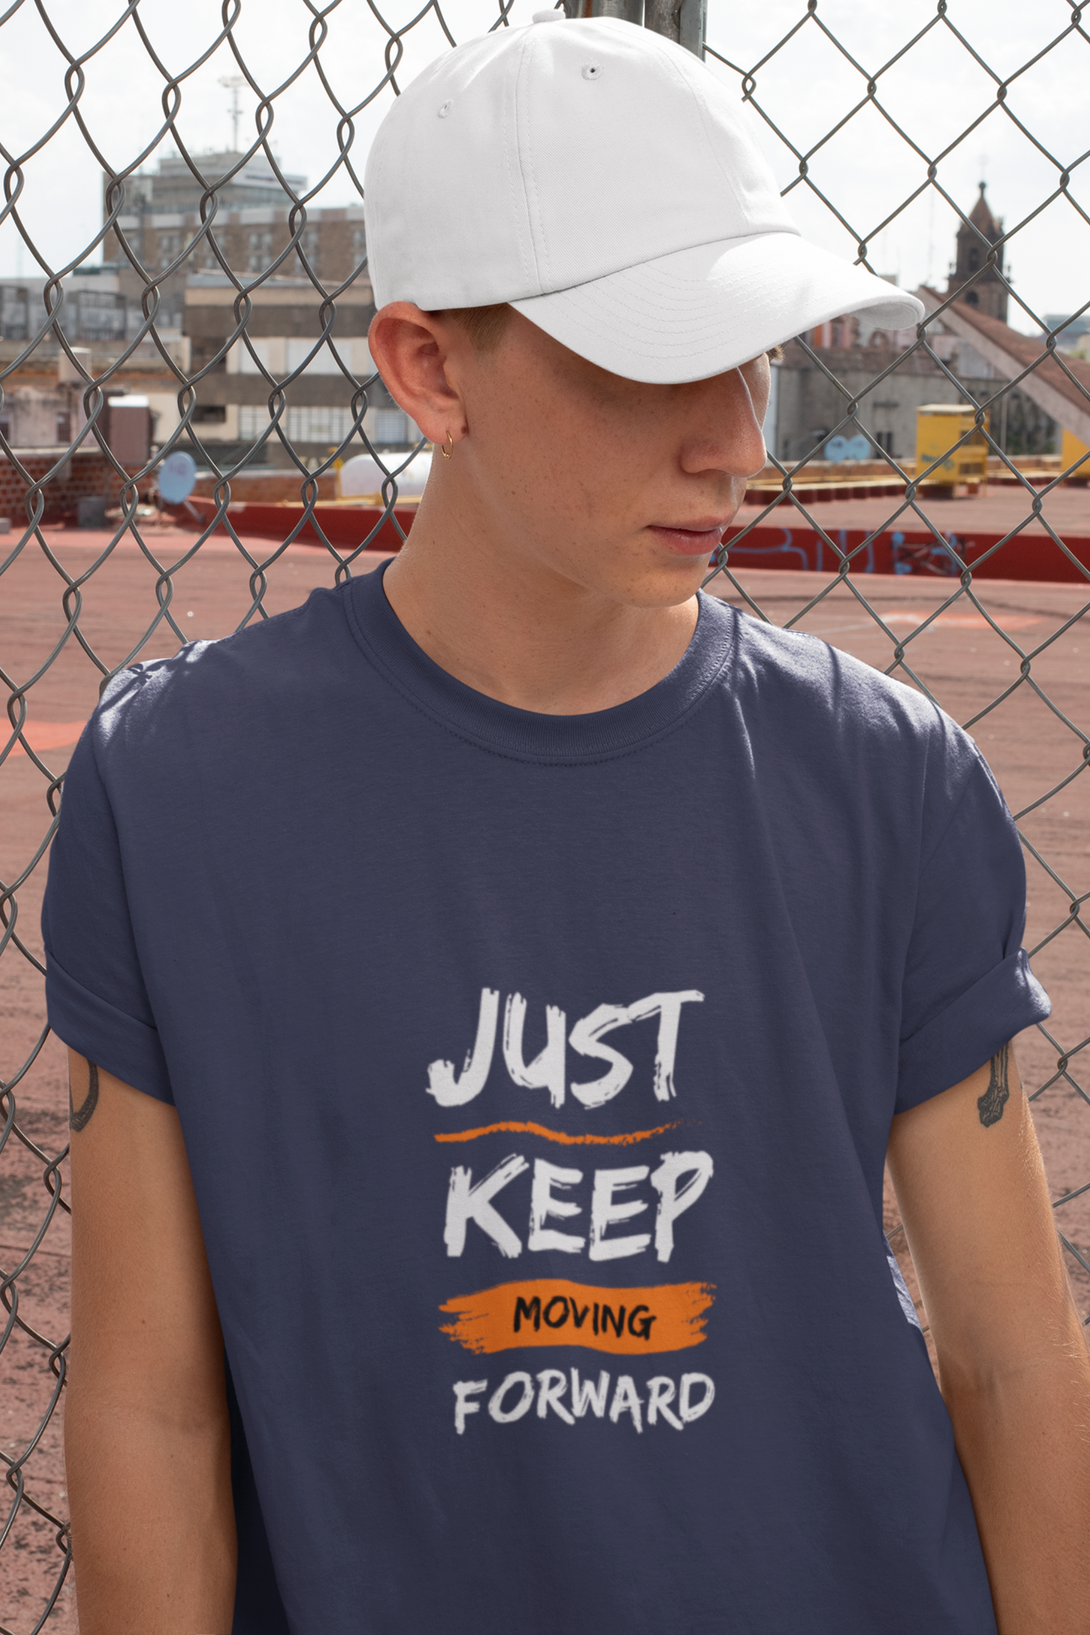 Keep Moving Forward Printed T-Shirt For Men - WowWaves - 5